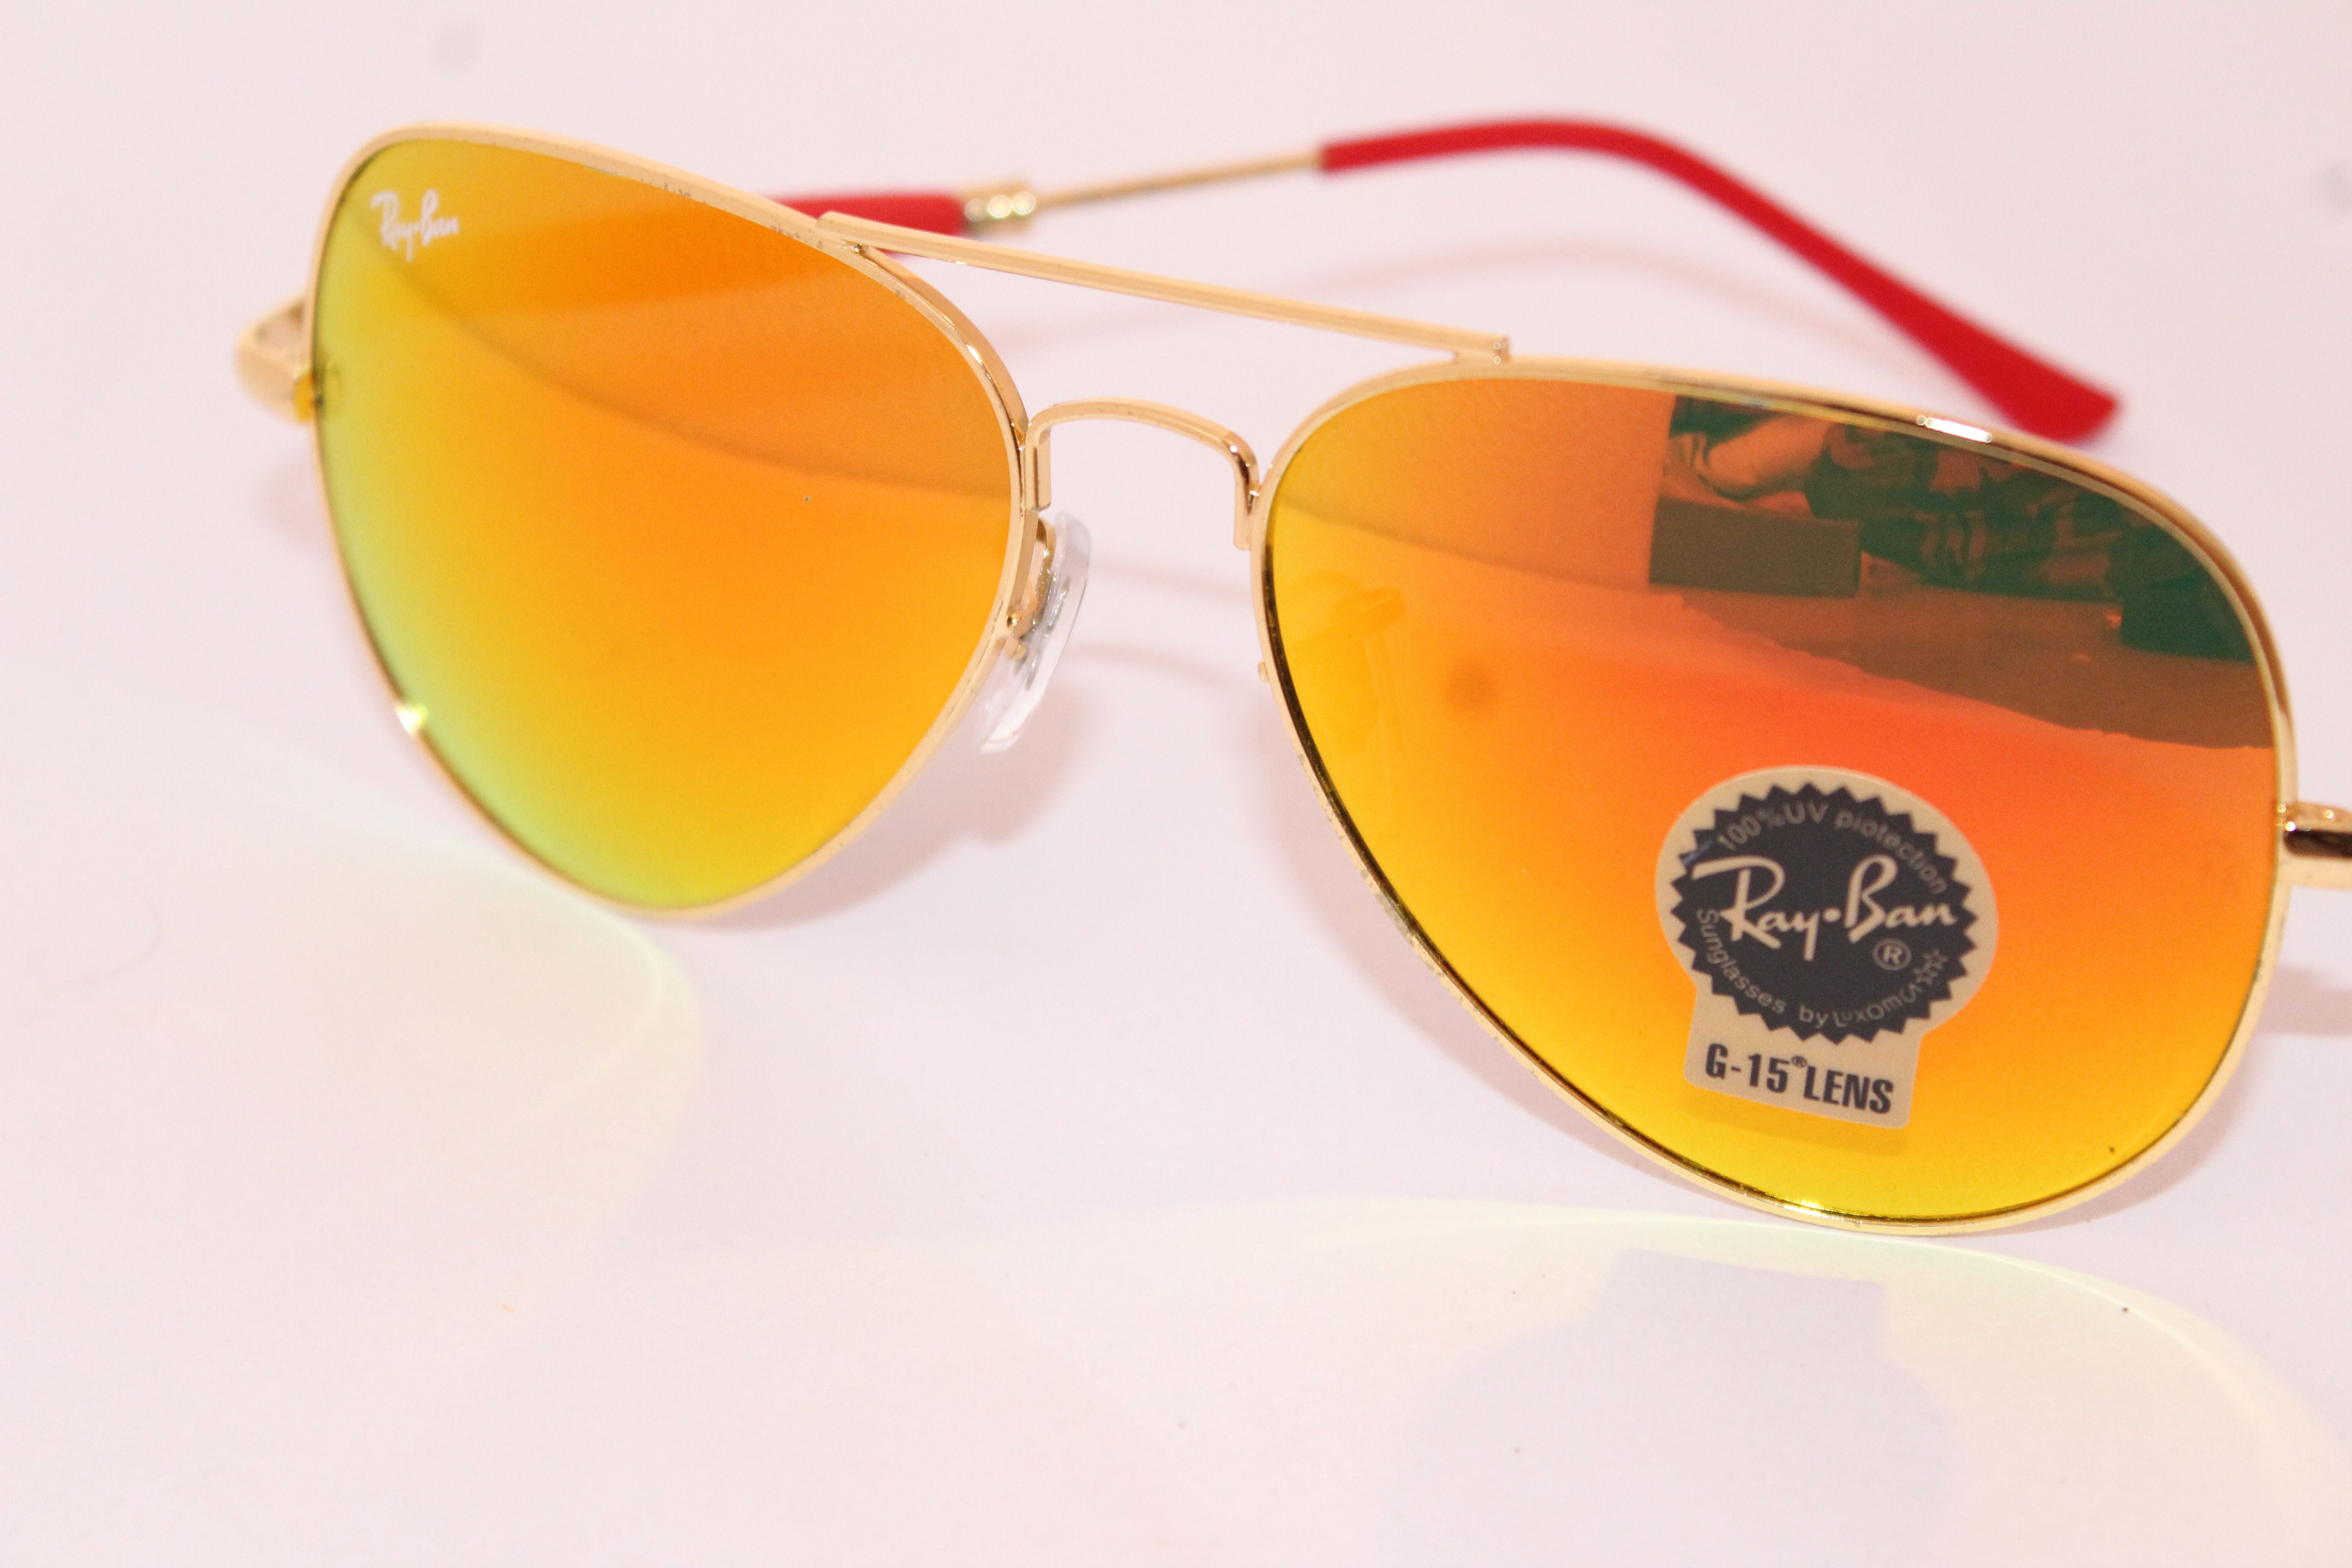 snapdeal ray ban aviator sunglasses